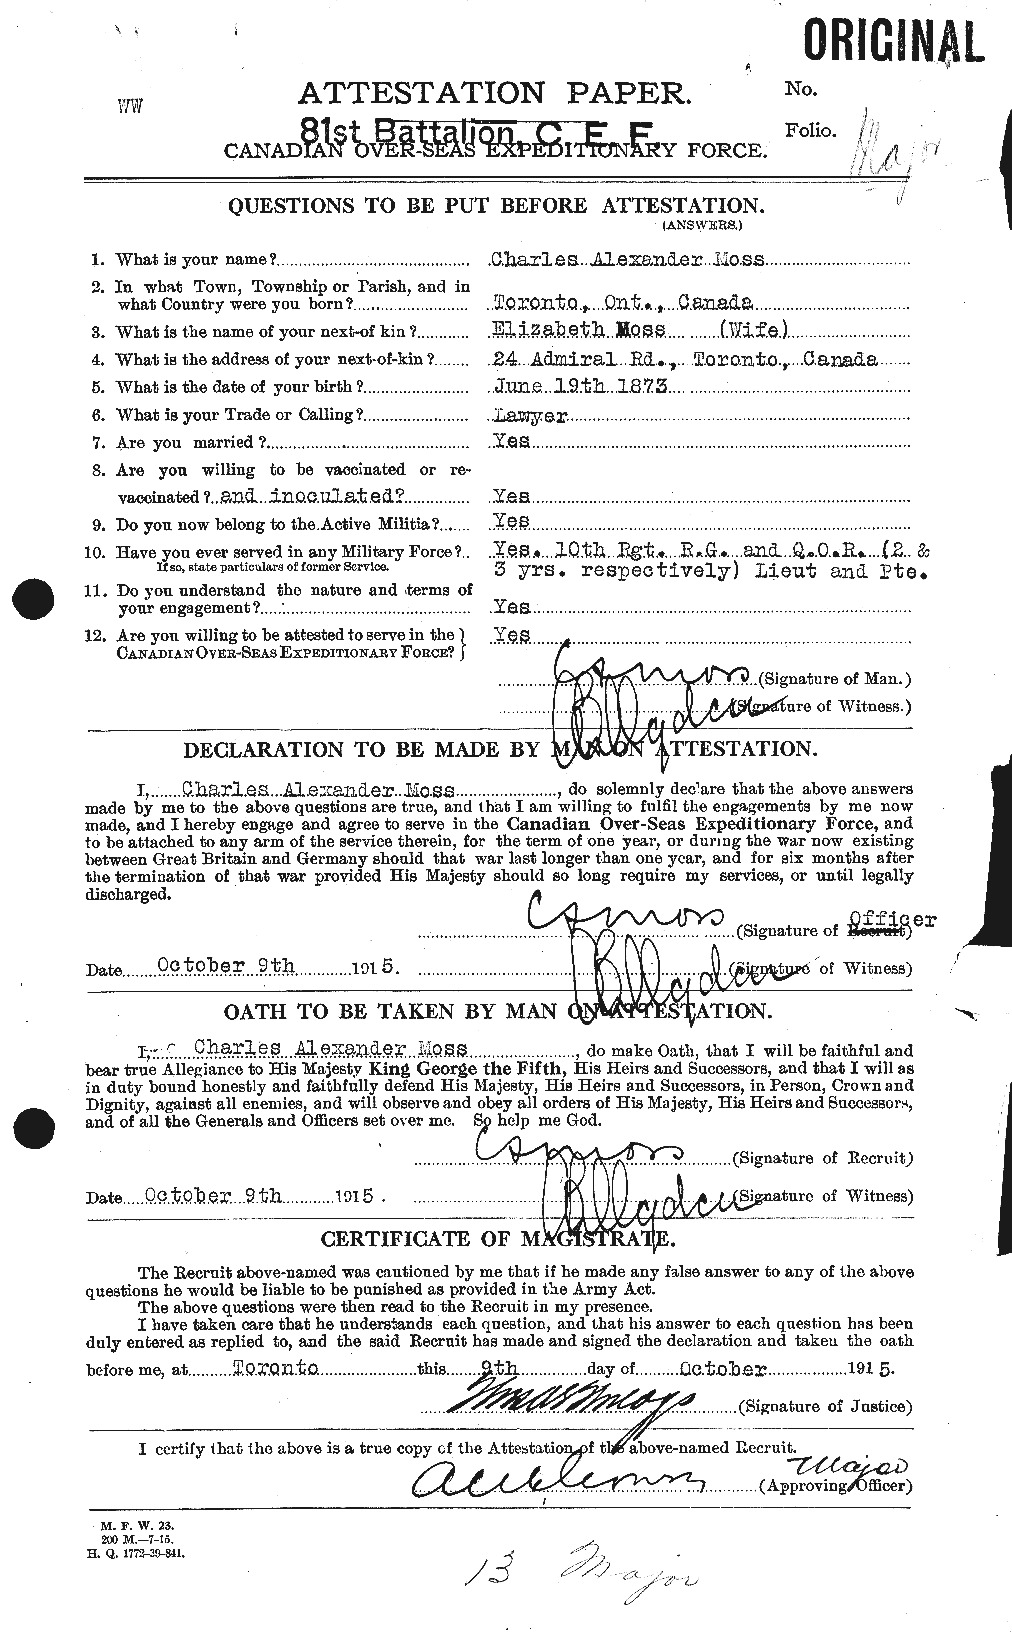 Personnel Records of the First World War - CEF 511951a